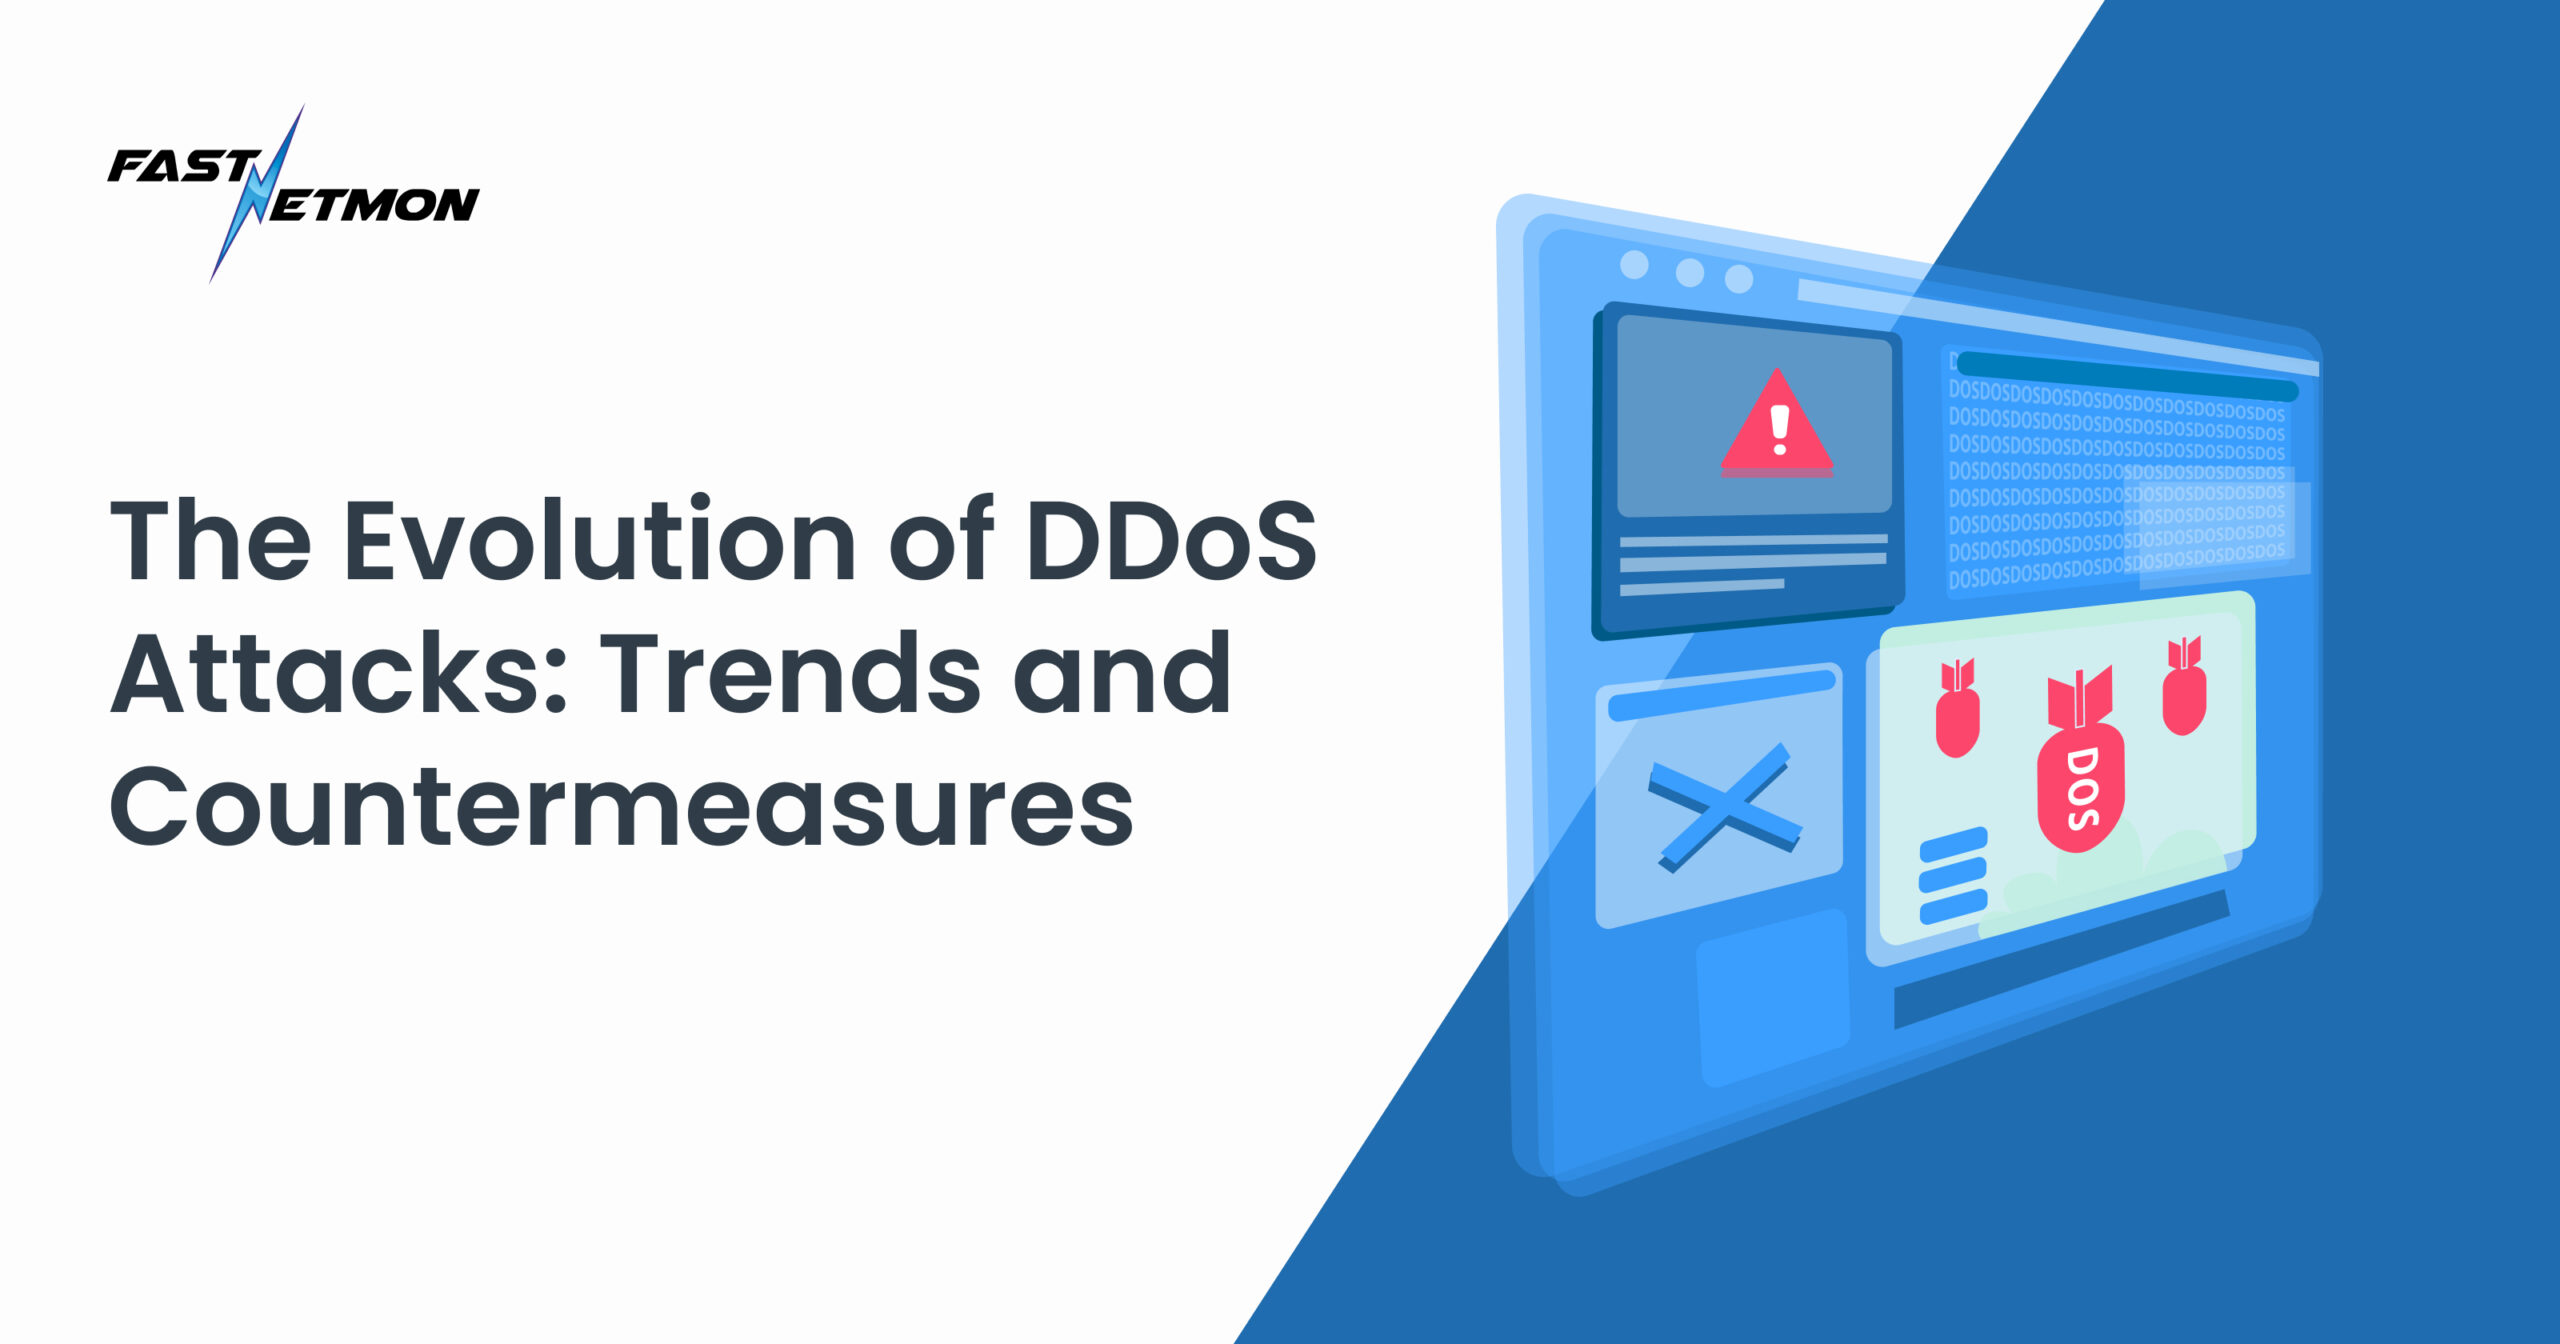 The Evolution of DDoS Attacks: Trends and Countermeasures